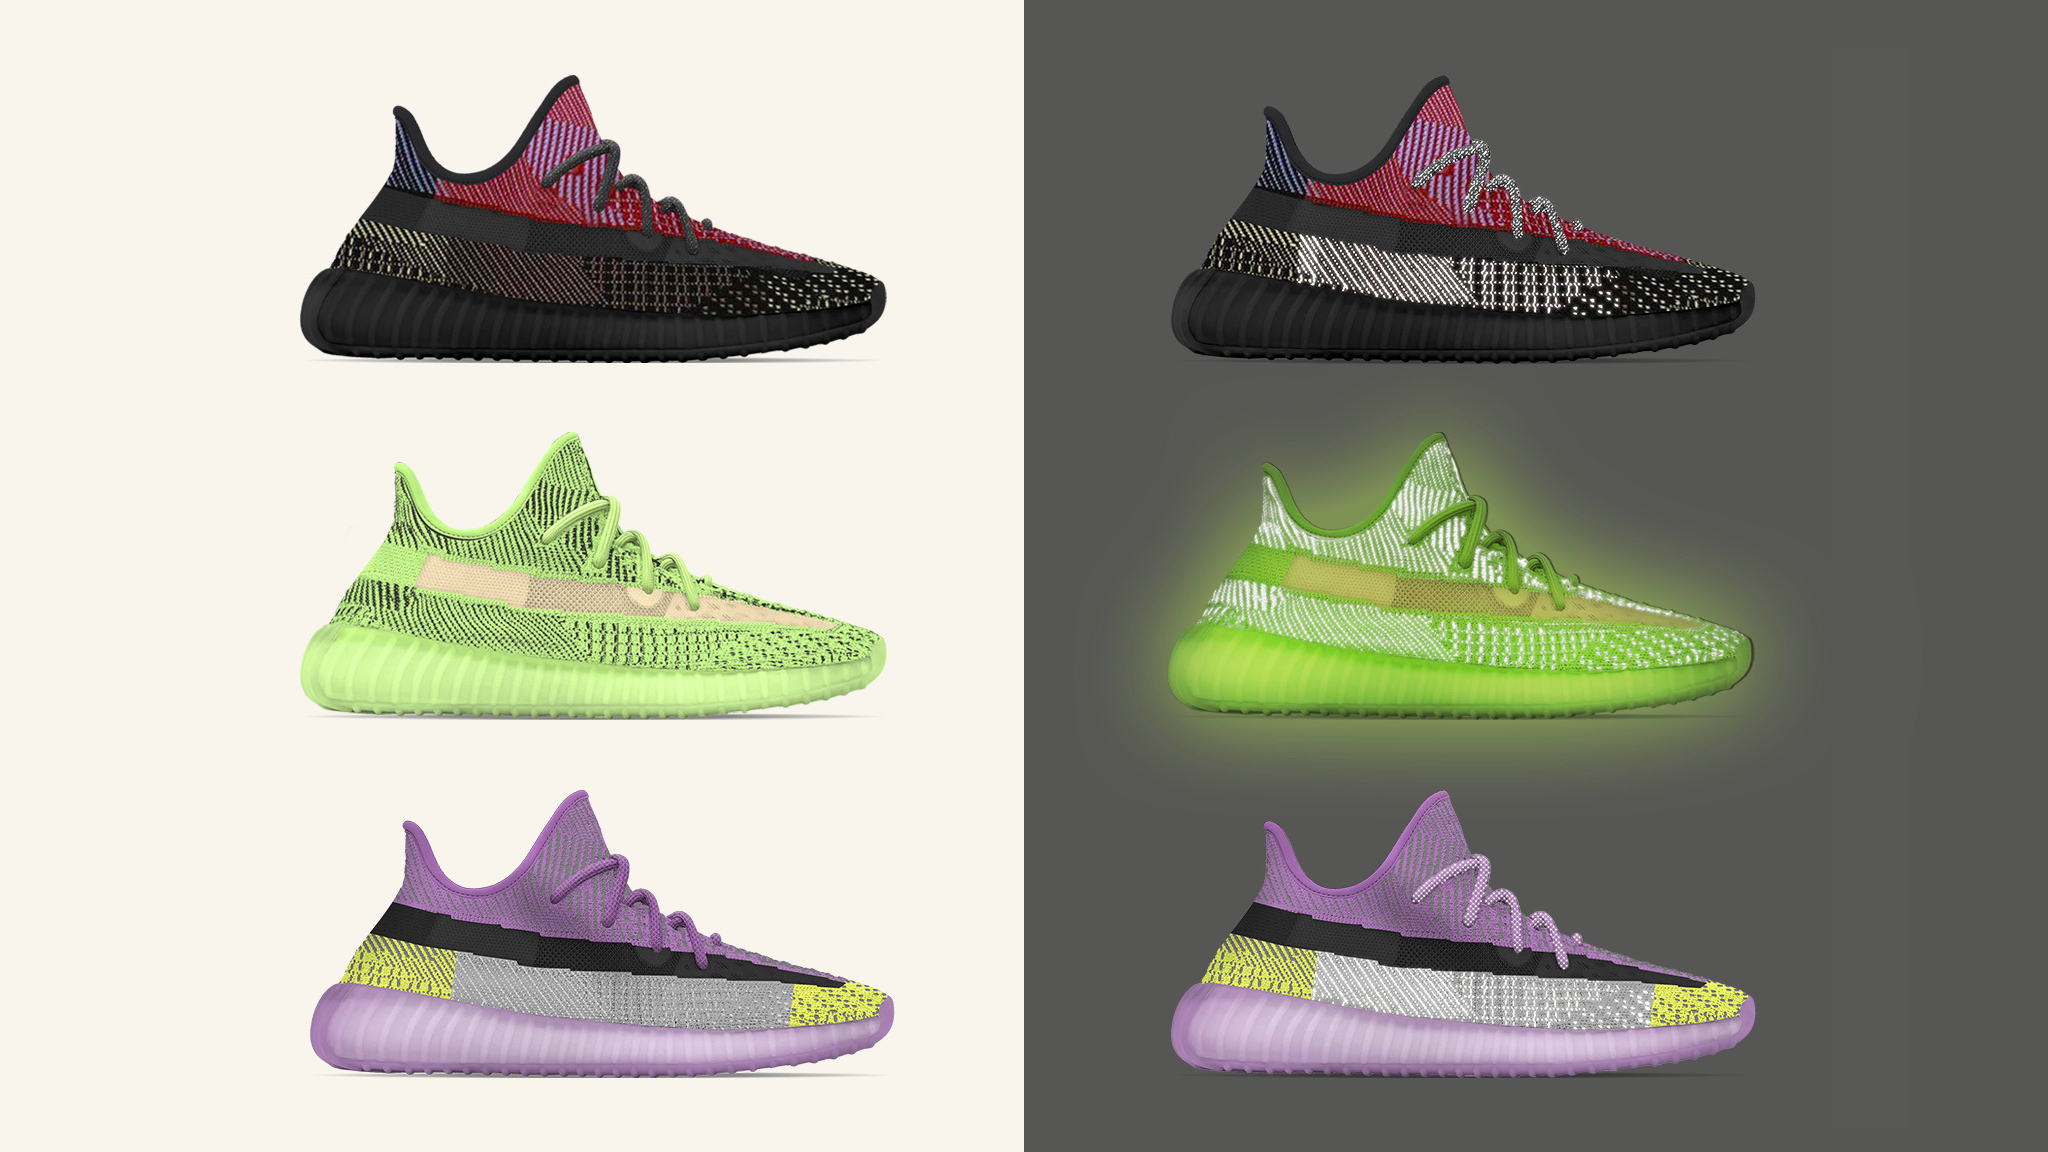 New Yeezys Have Just Been Confirmed To Be Releasing Very Soon